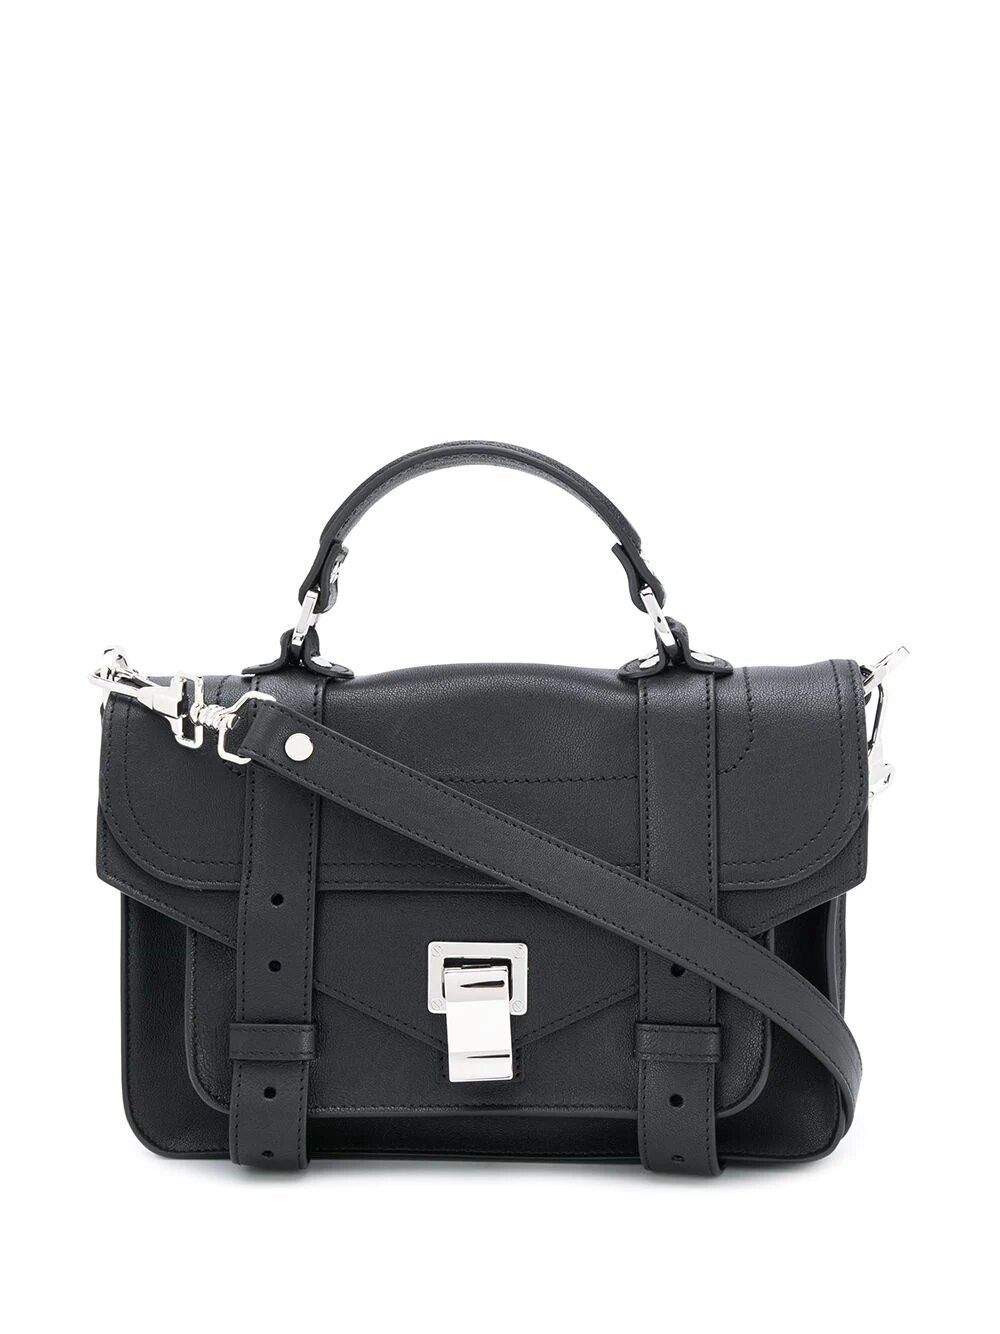 PROENZA SCHOULER PS1 TINY LEATHER